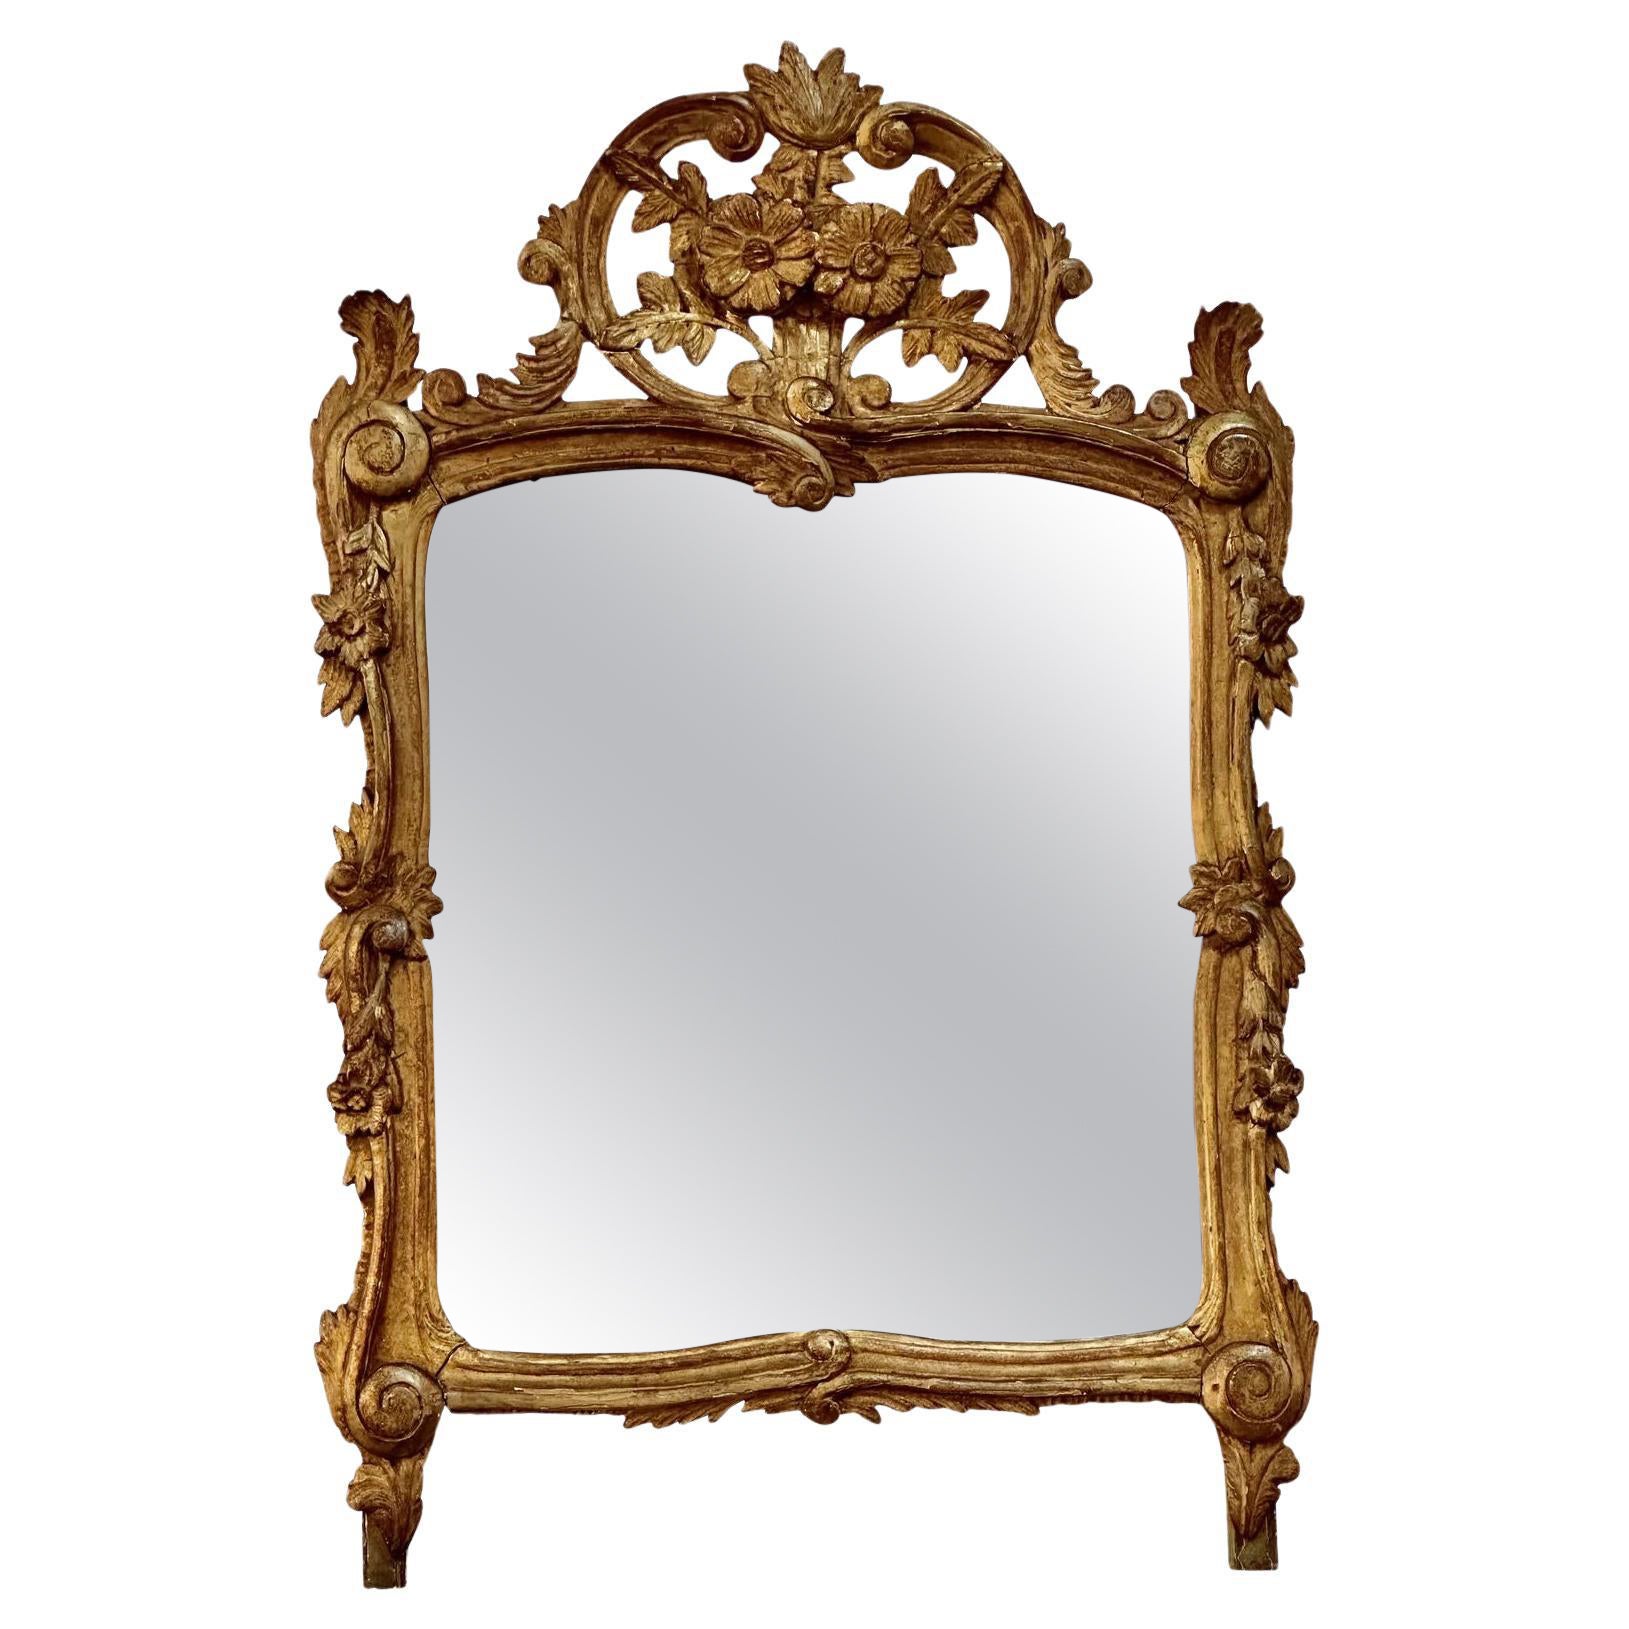 French Provincial Mirror with Floral and Foliate Carvings For Sale